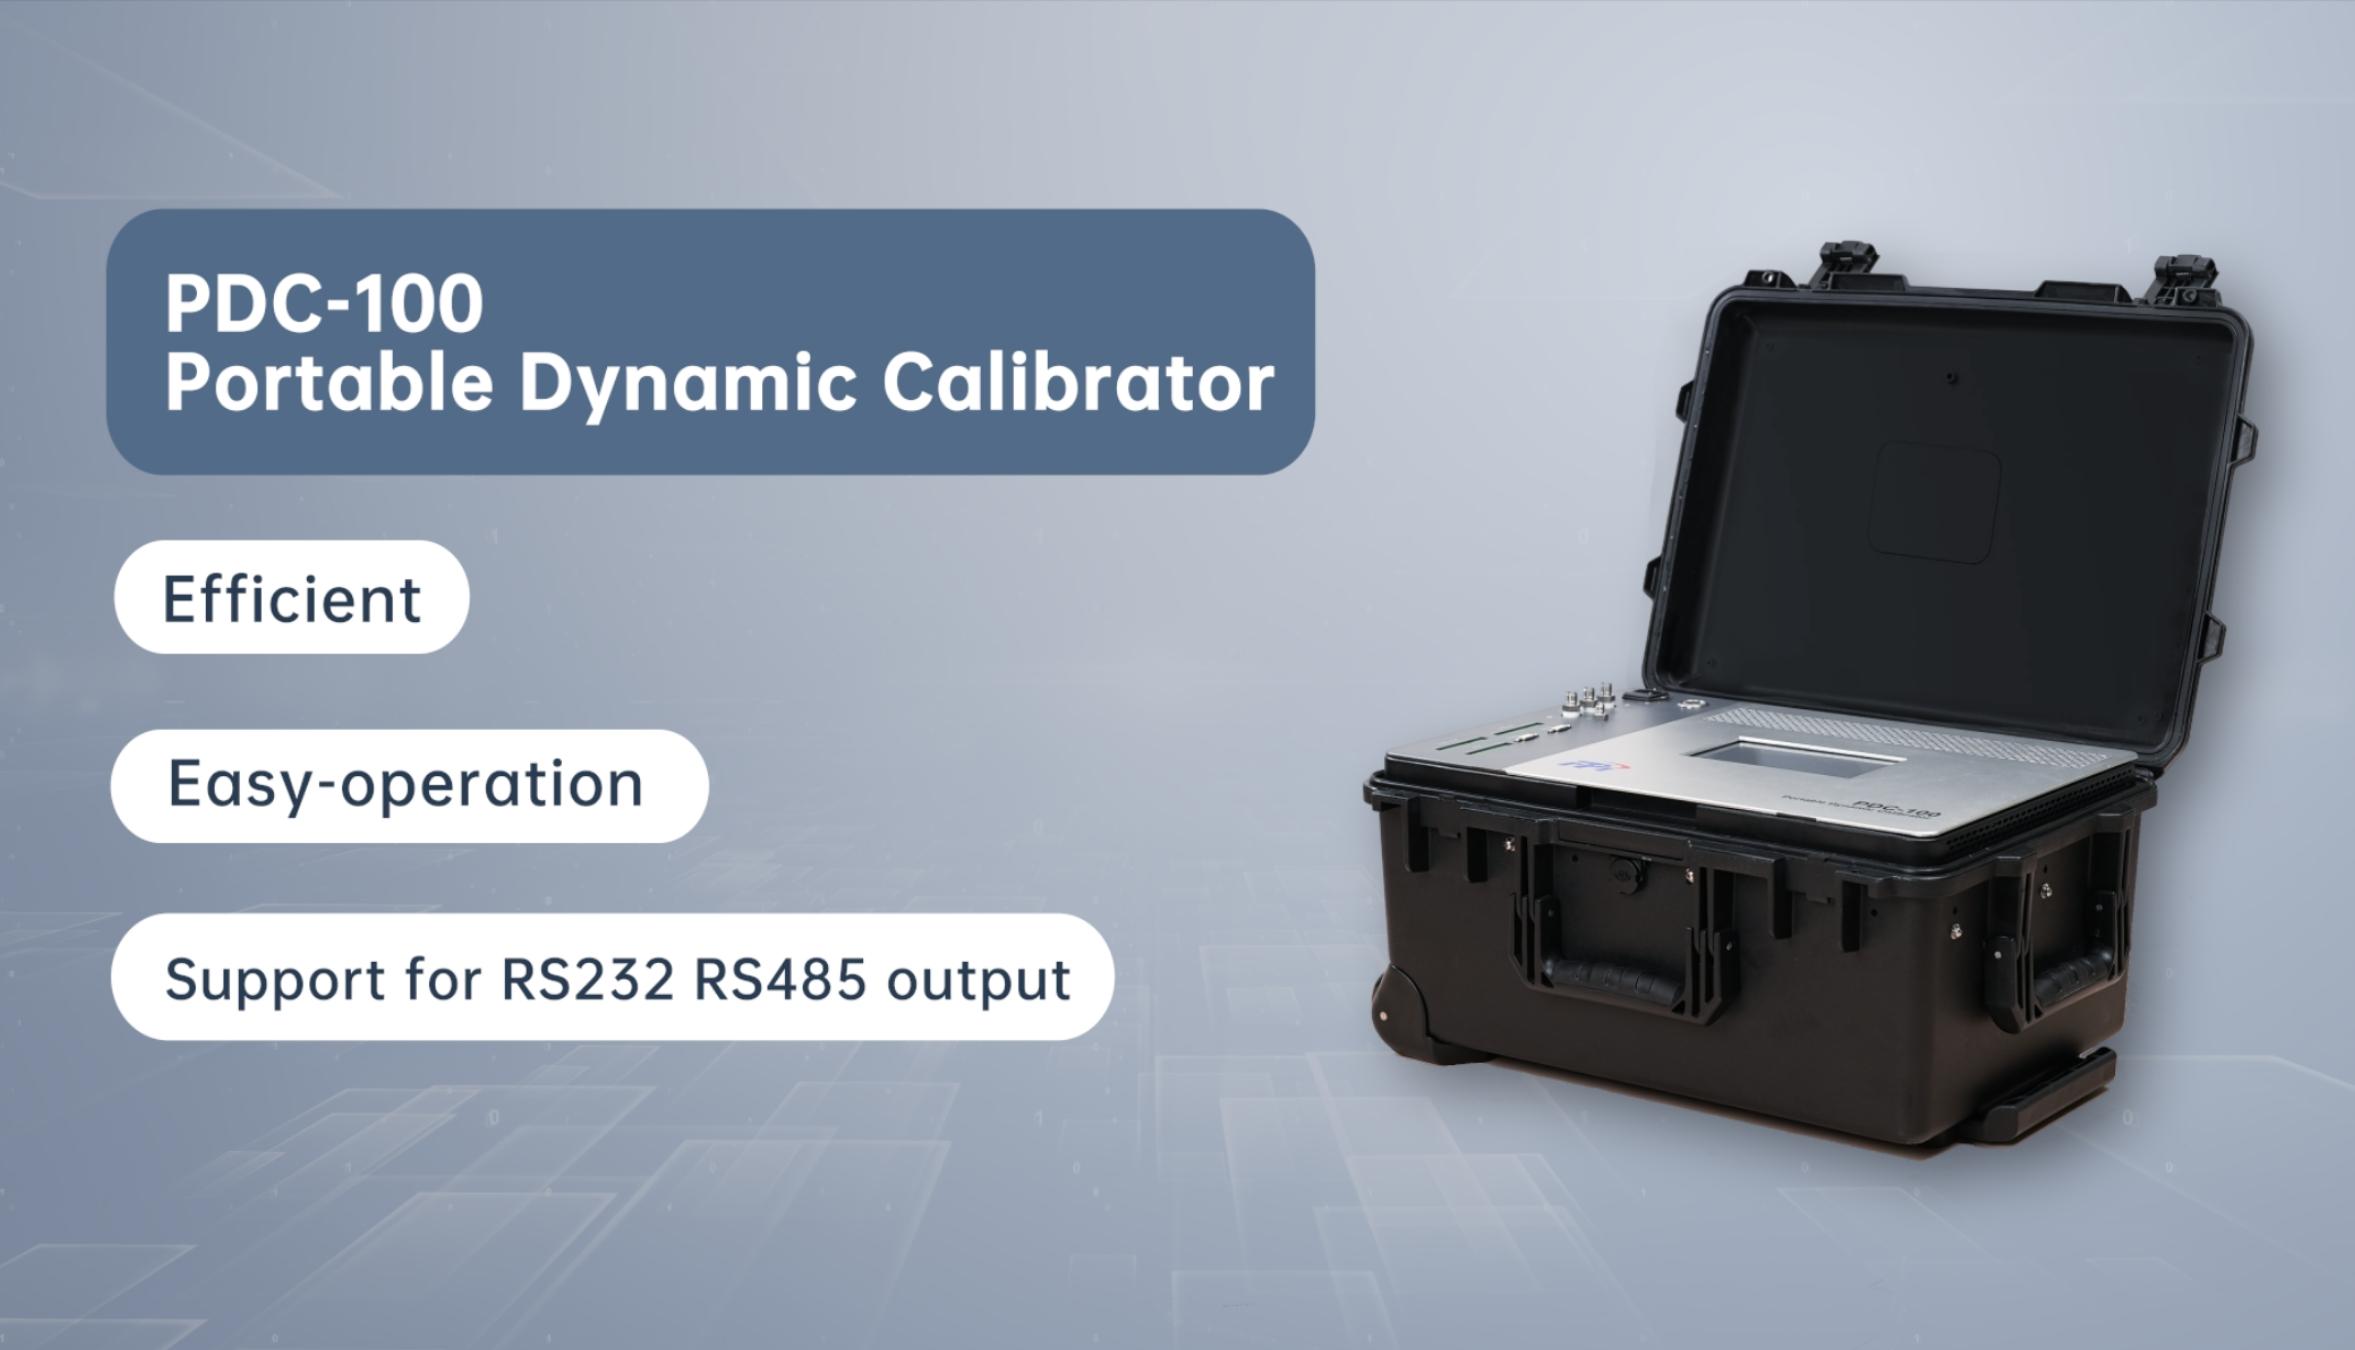 FPI Launches the Video of the PDC-100 Portable Dynamic Calibrator